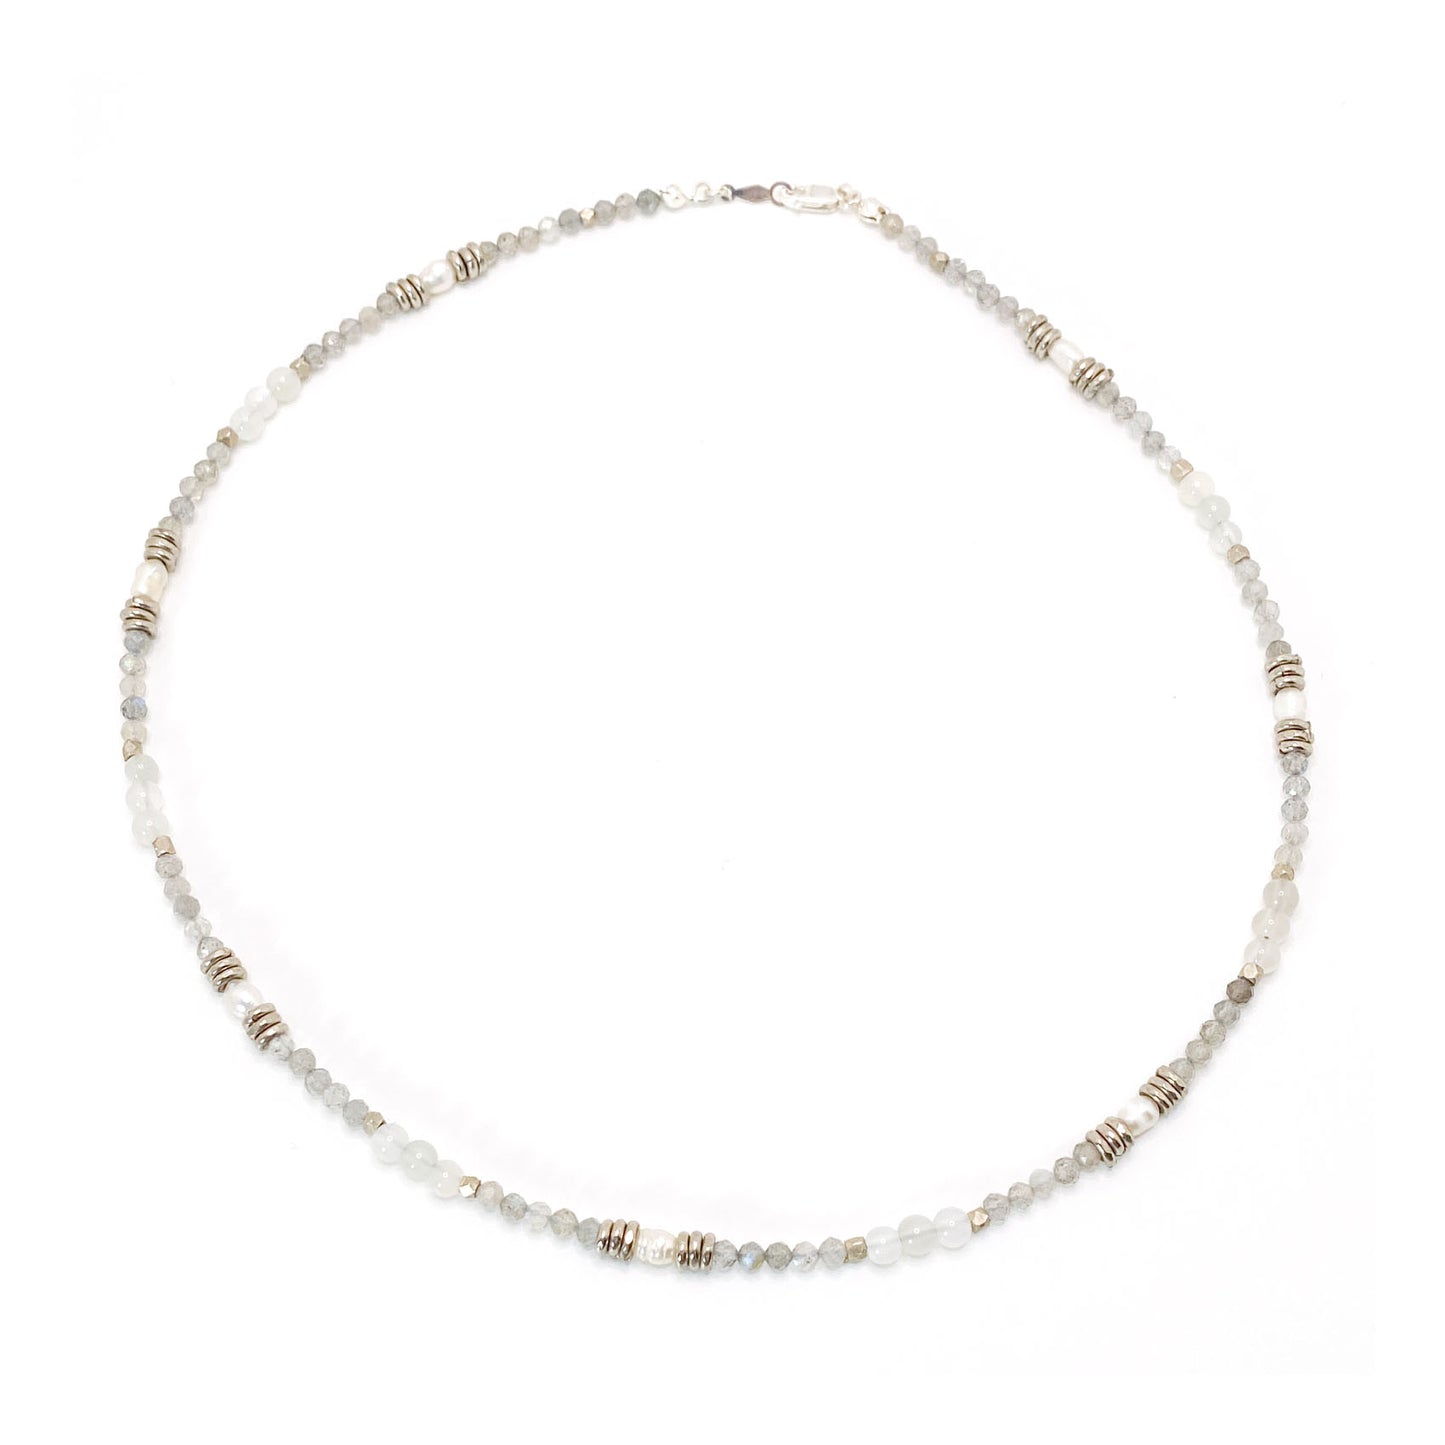 Beaded Labradorite Moonstone and Pearl Necklace